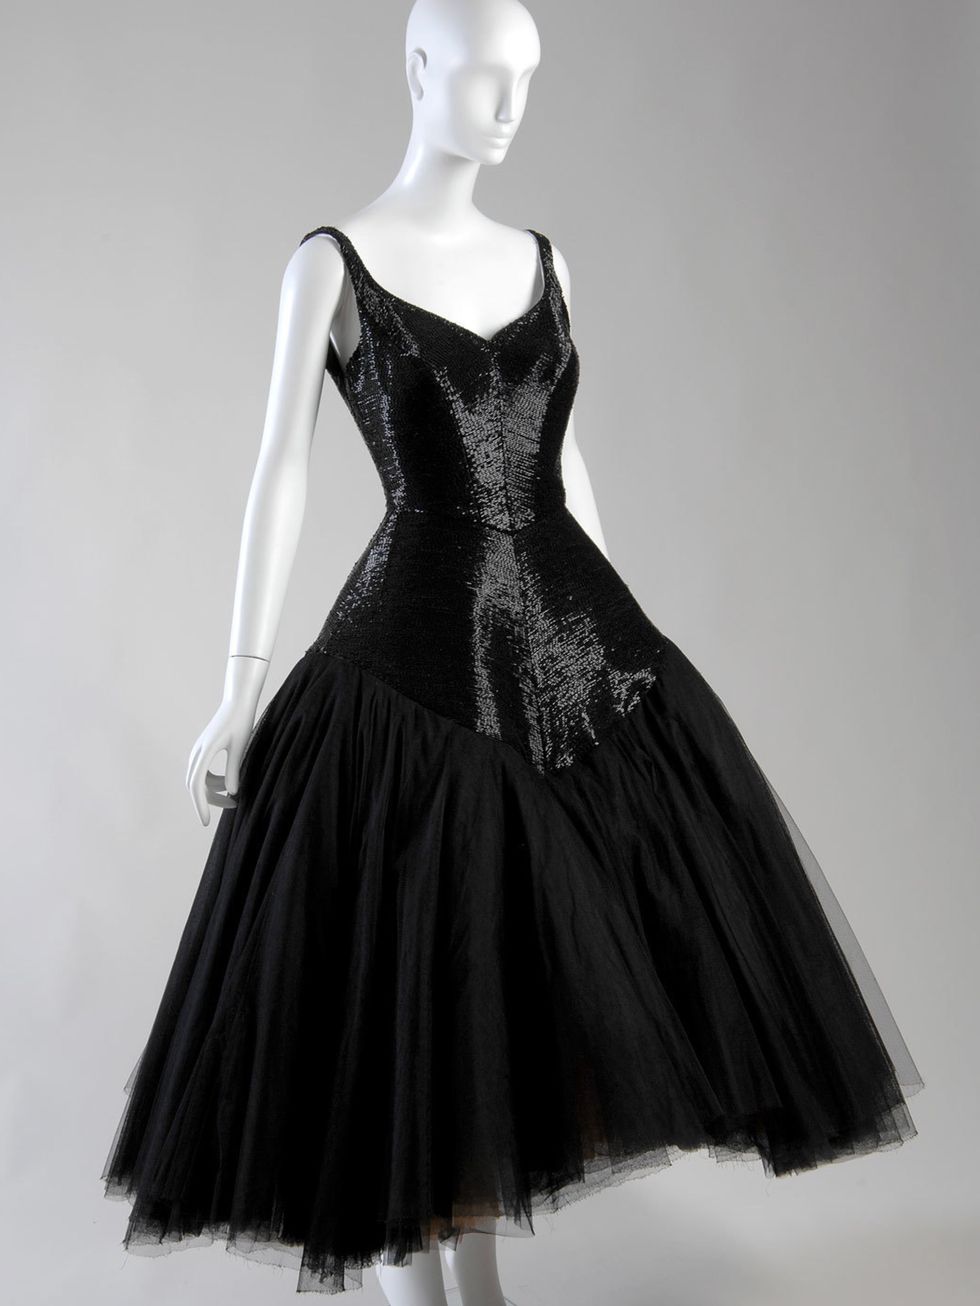 <p>'Infanta' gown by Charles James, 1952.</p>